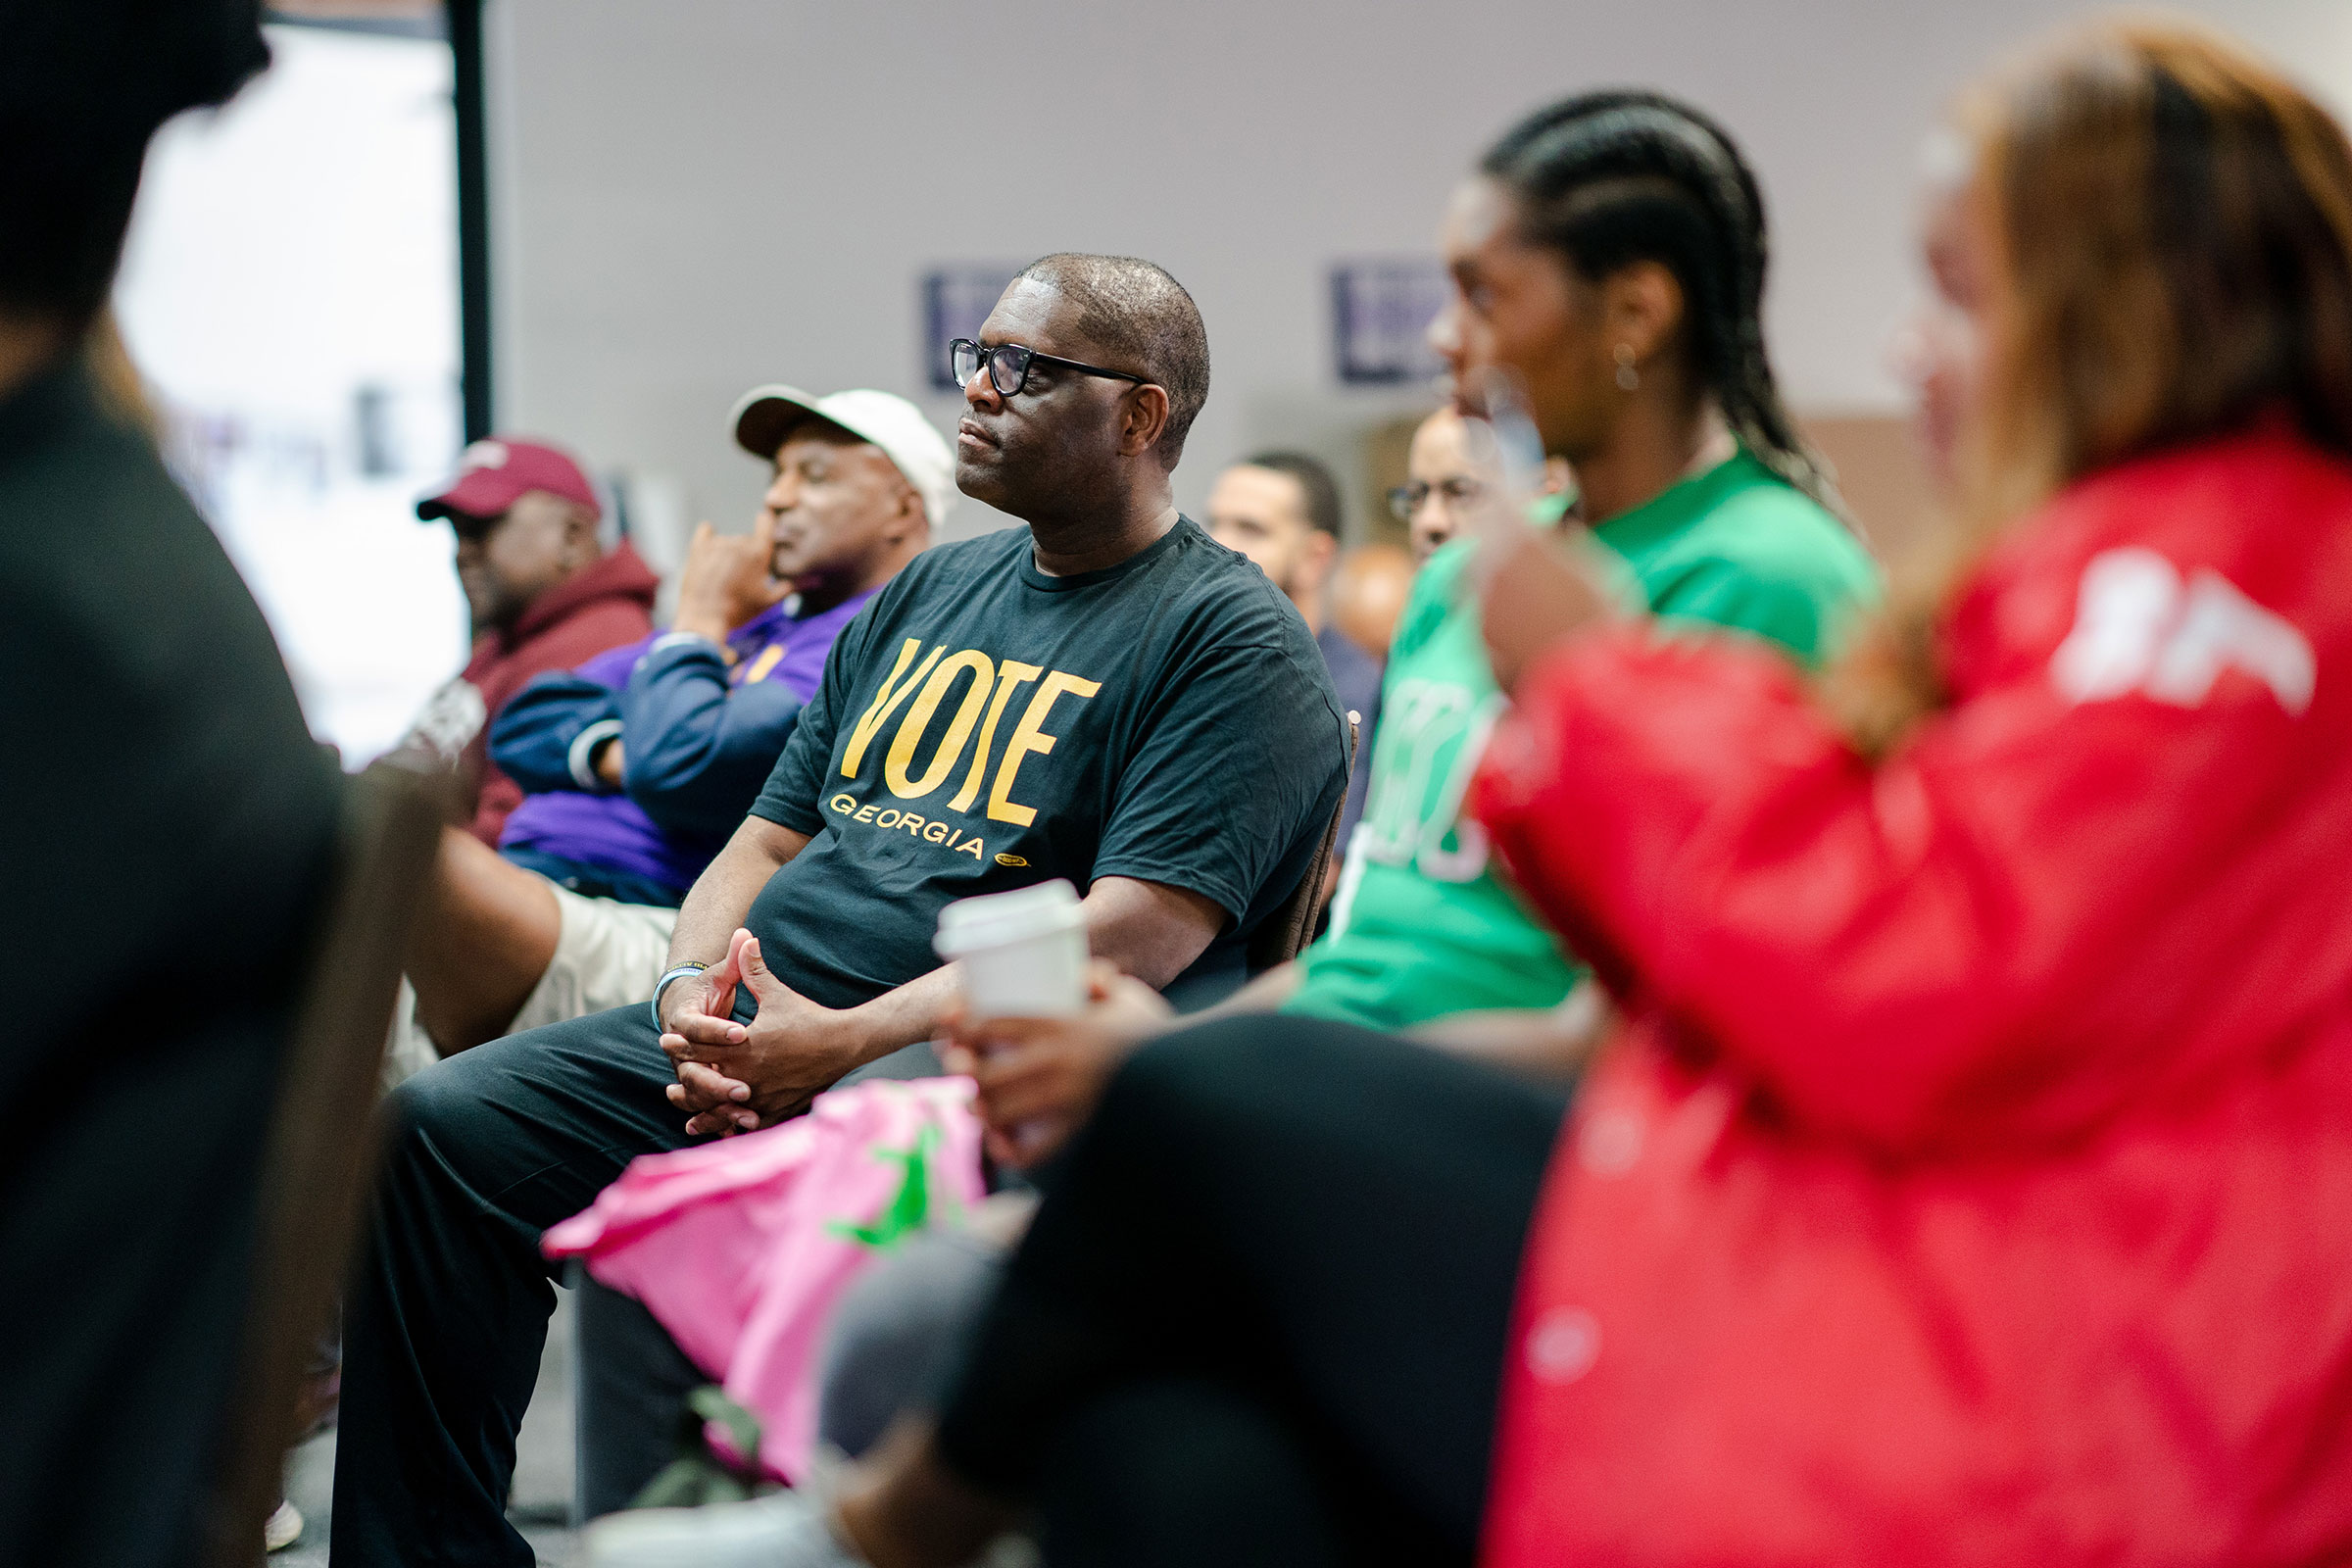 Members of Greek letter organizations listen as Stacey Abrams speaks during Divine 9 Day of Action on Oct. 8, 2022, an event aimed at reaching voters to cast their ballot for her for Georgia governor. (Kevin D. Liles—The Washington Post/Getty Images)